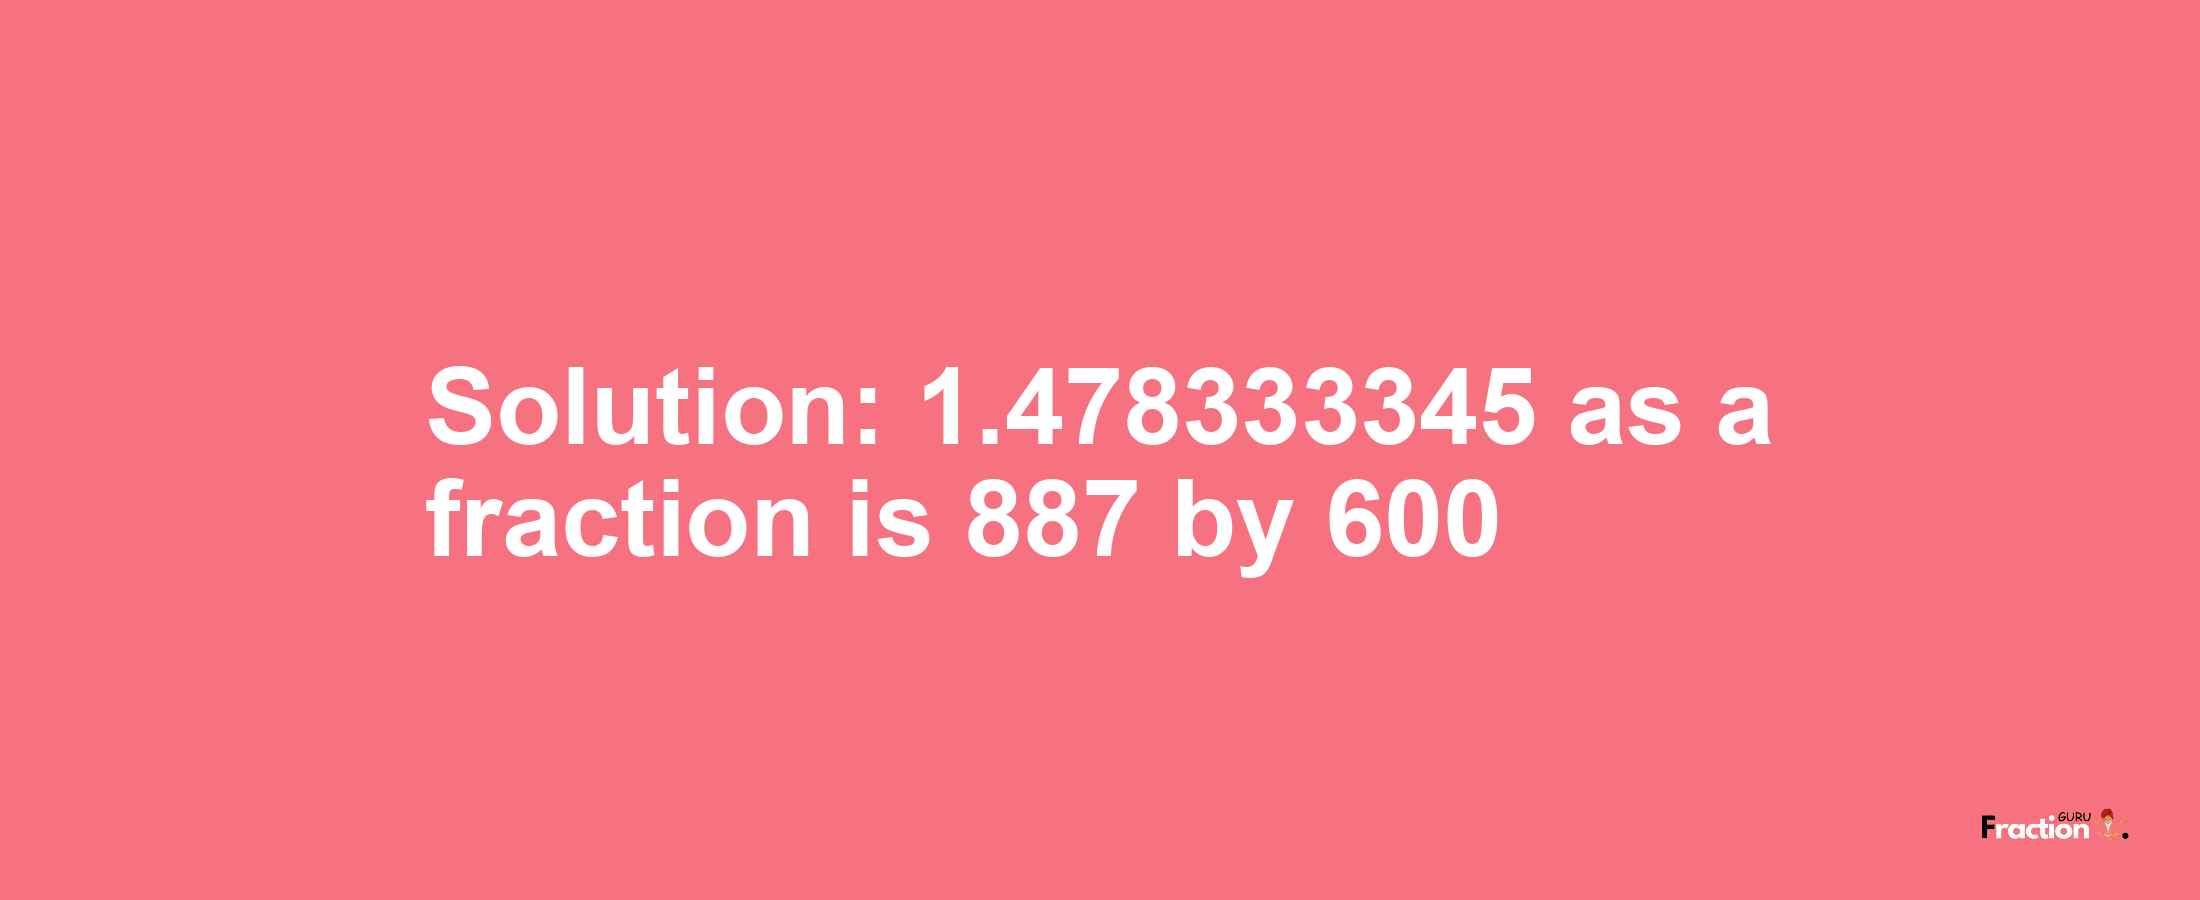 Solution:1.478333345 as a fraction is 887/600